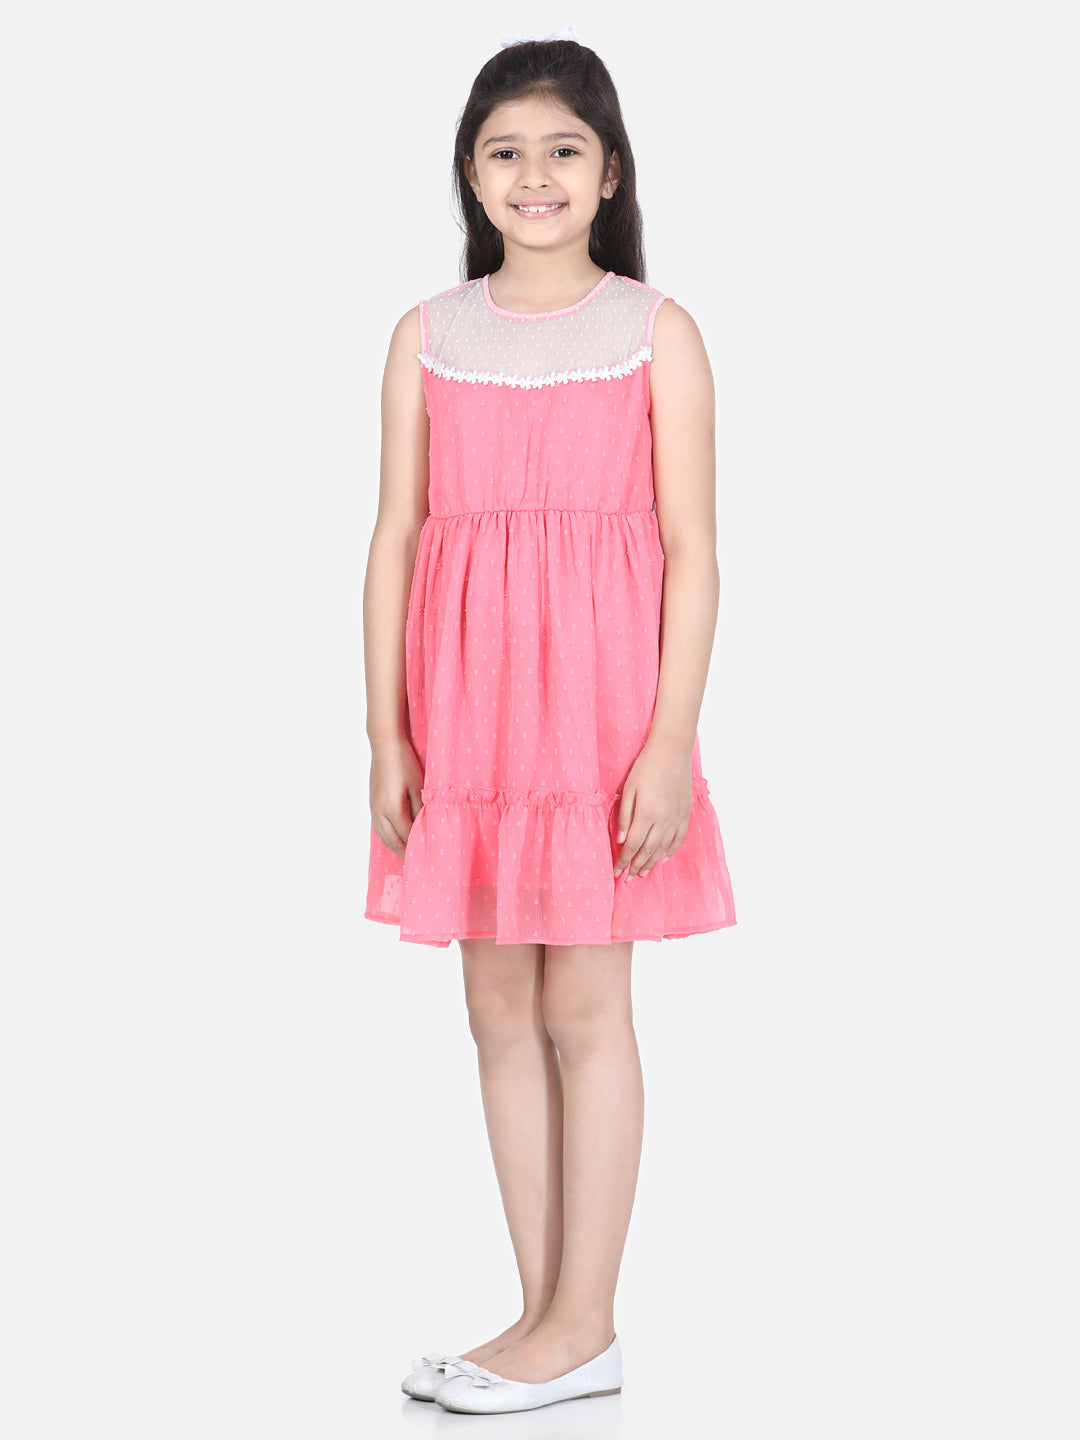 Girls Coral Pink Polyester Self Design Dress with Net and Lace Inserts